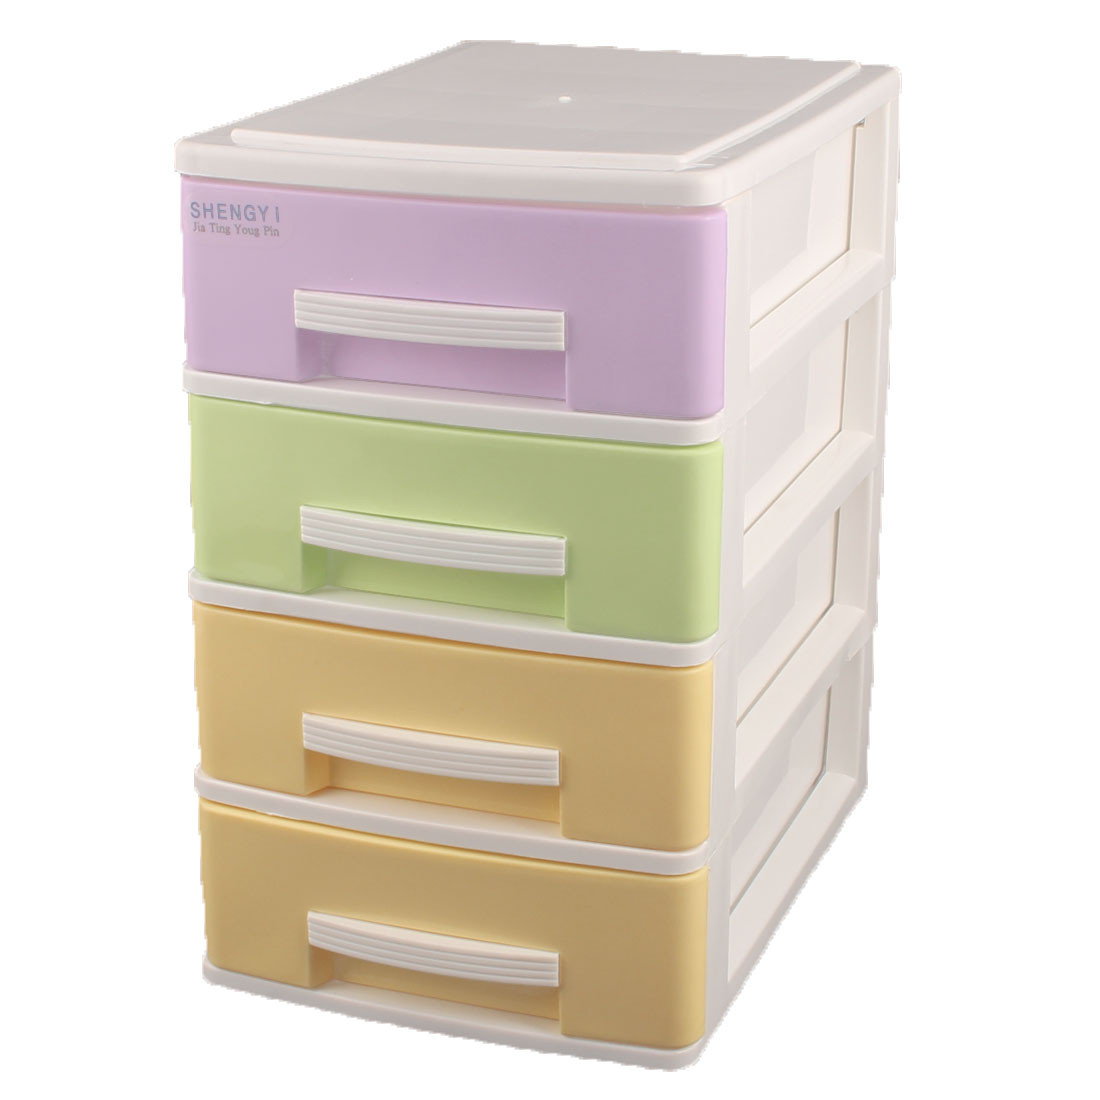 Bedroom Storage Bins
 Household Bedroom Four Layers Design Storage Box Container